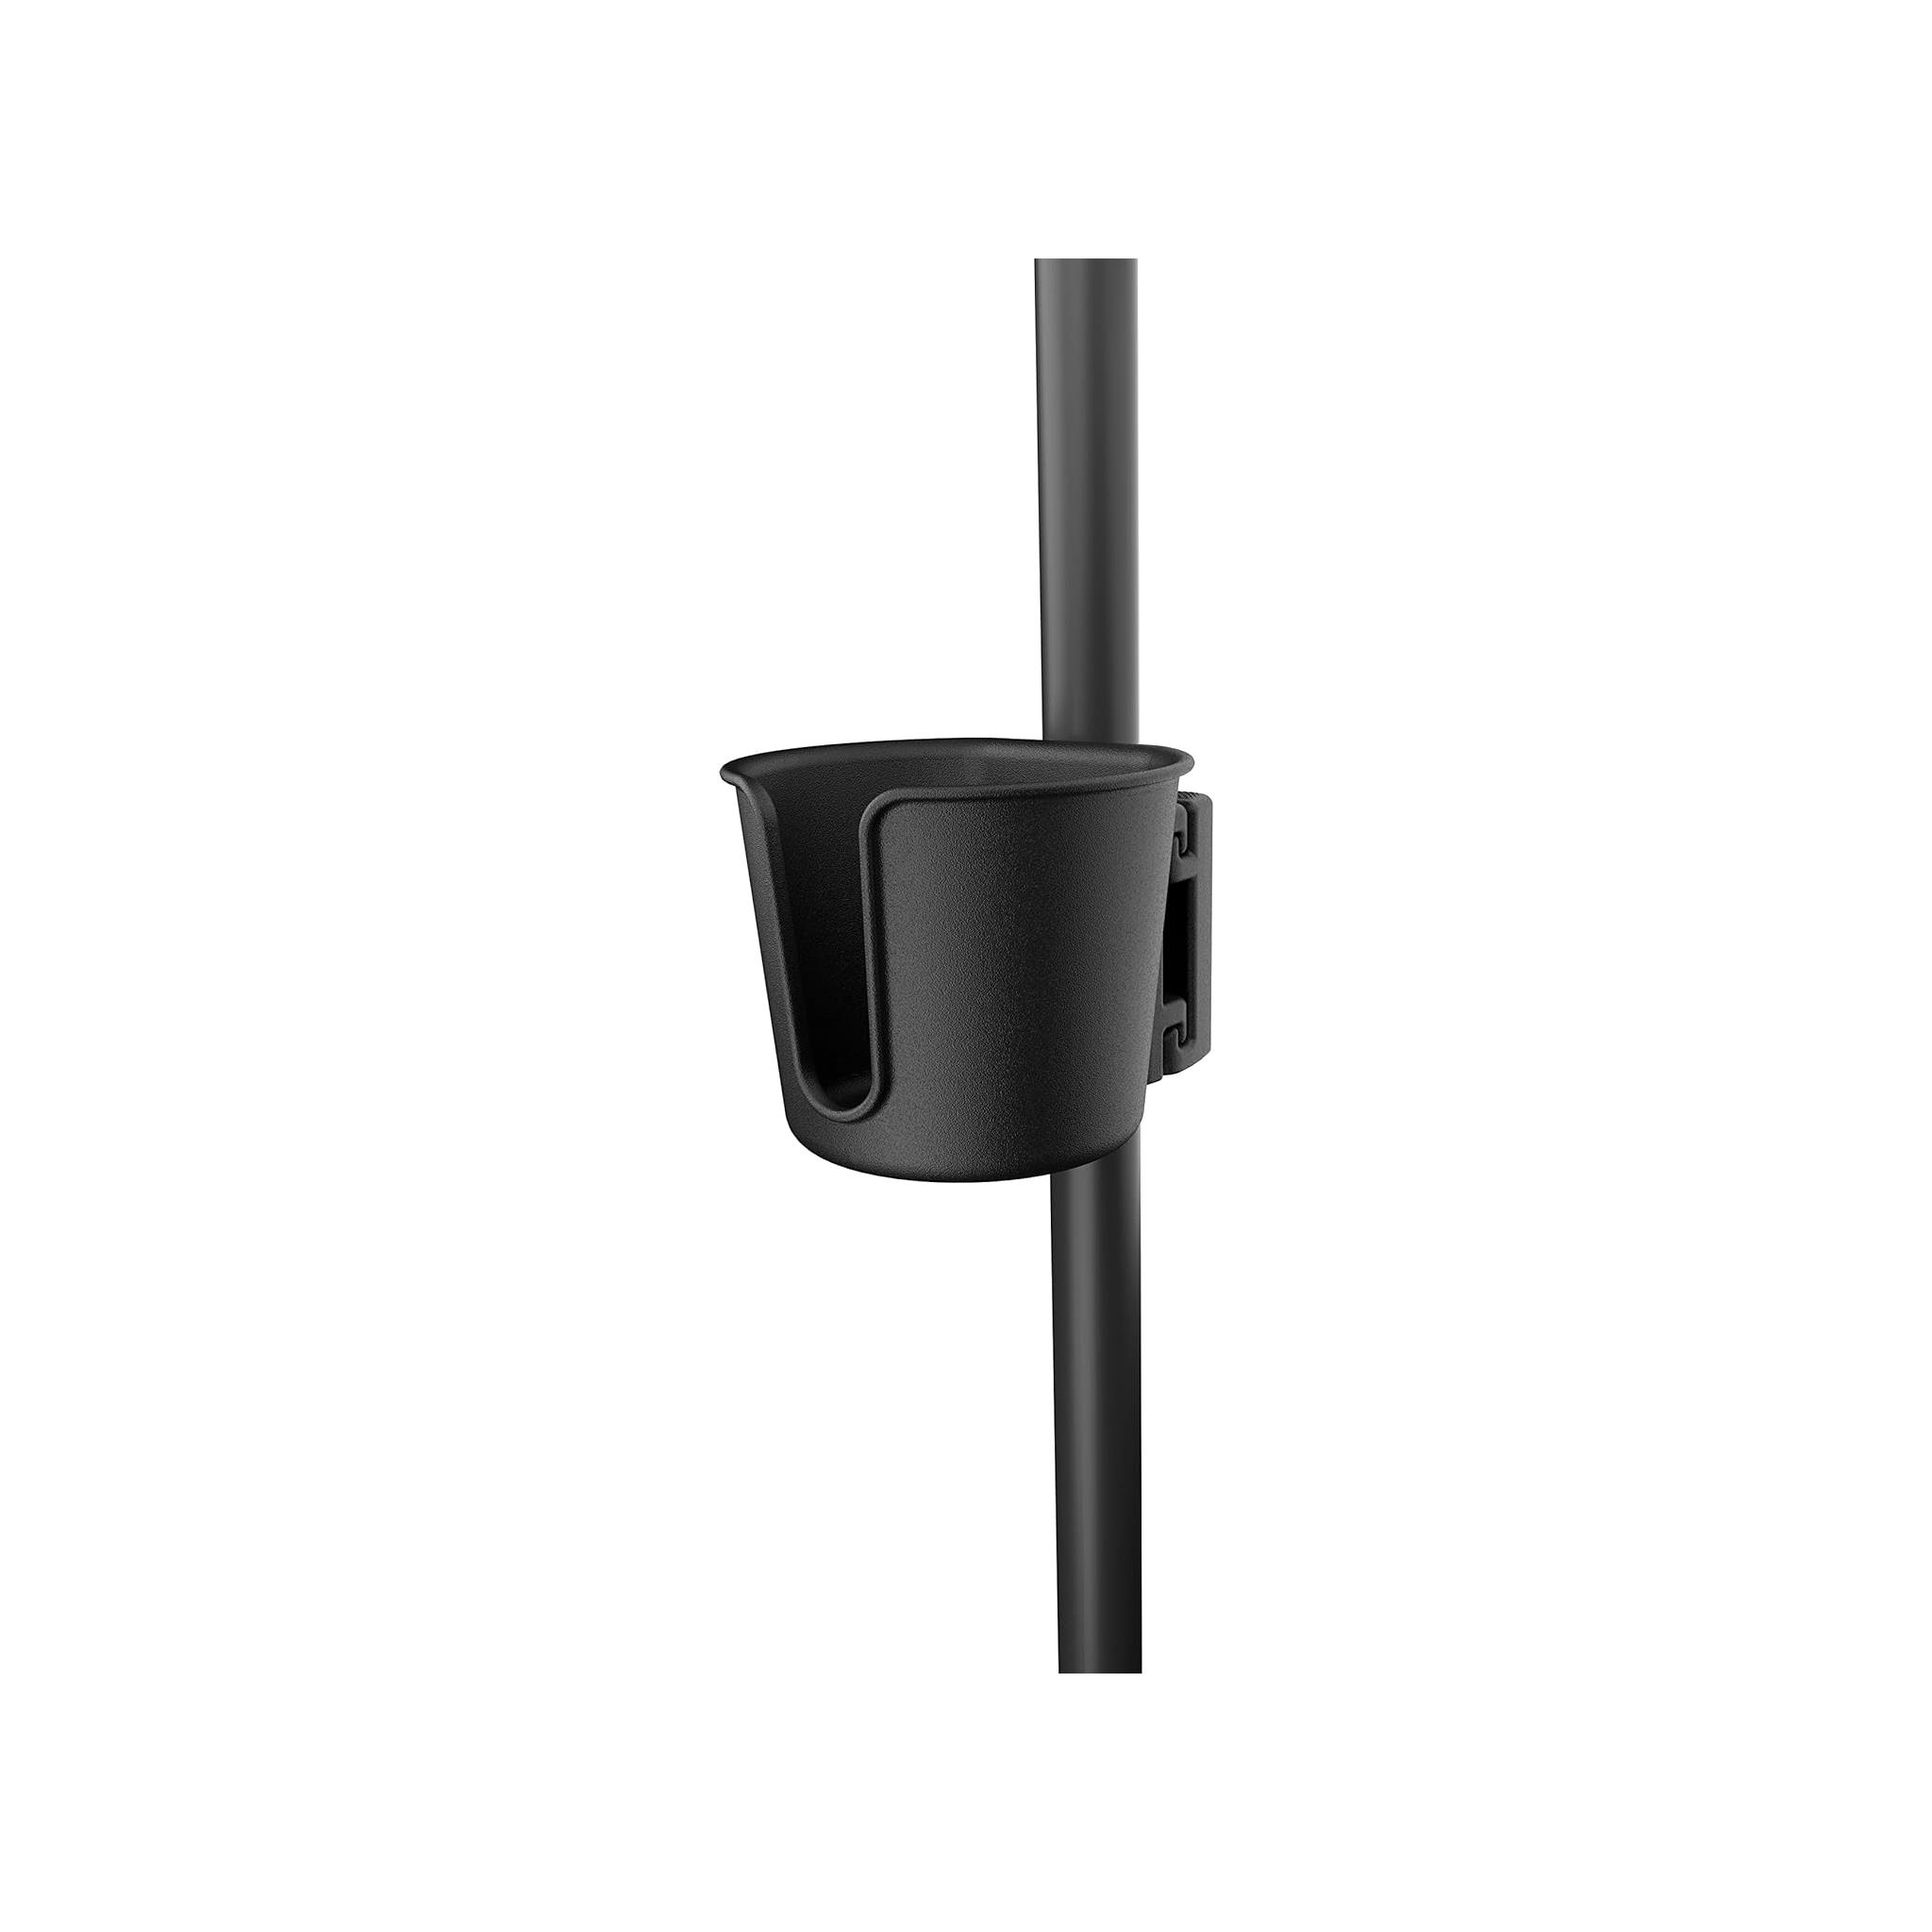 D'Addario Mic Stand Accessory System - Cup Holder